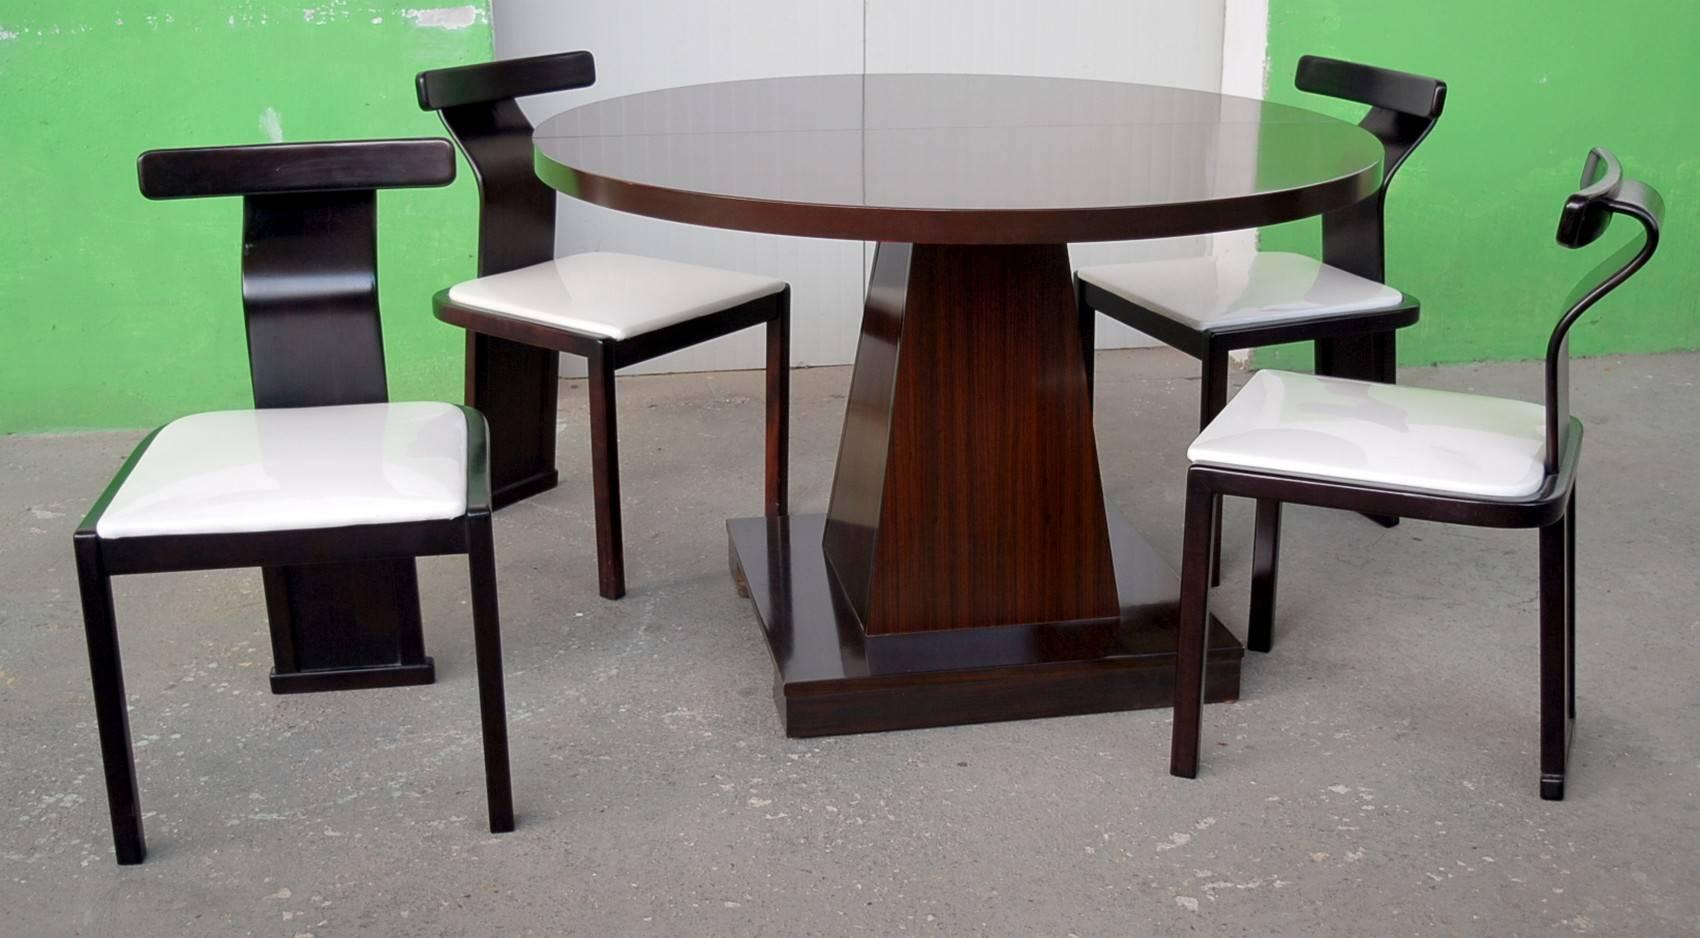 Faux Leather Four Chairs and Table Midcentury Set, Saporiti, Introini and Willy Rizzo Design